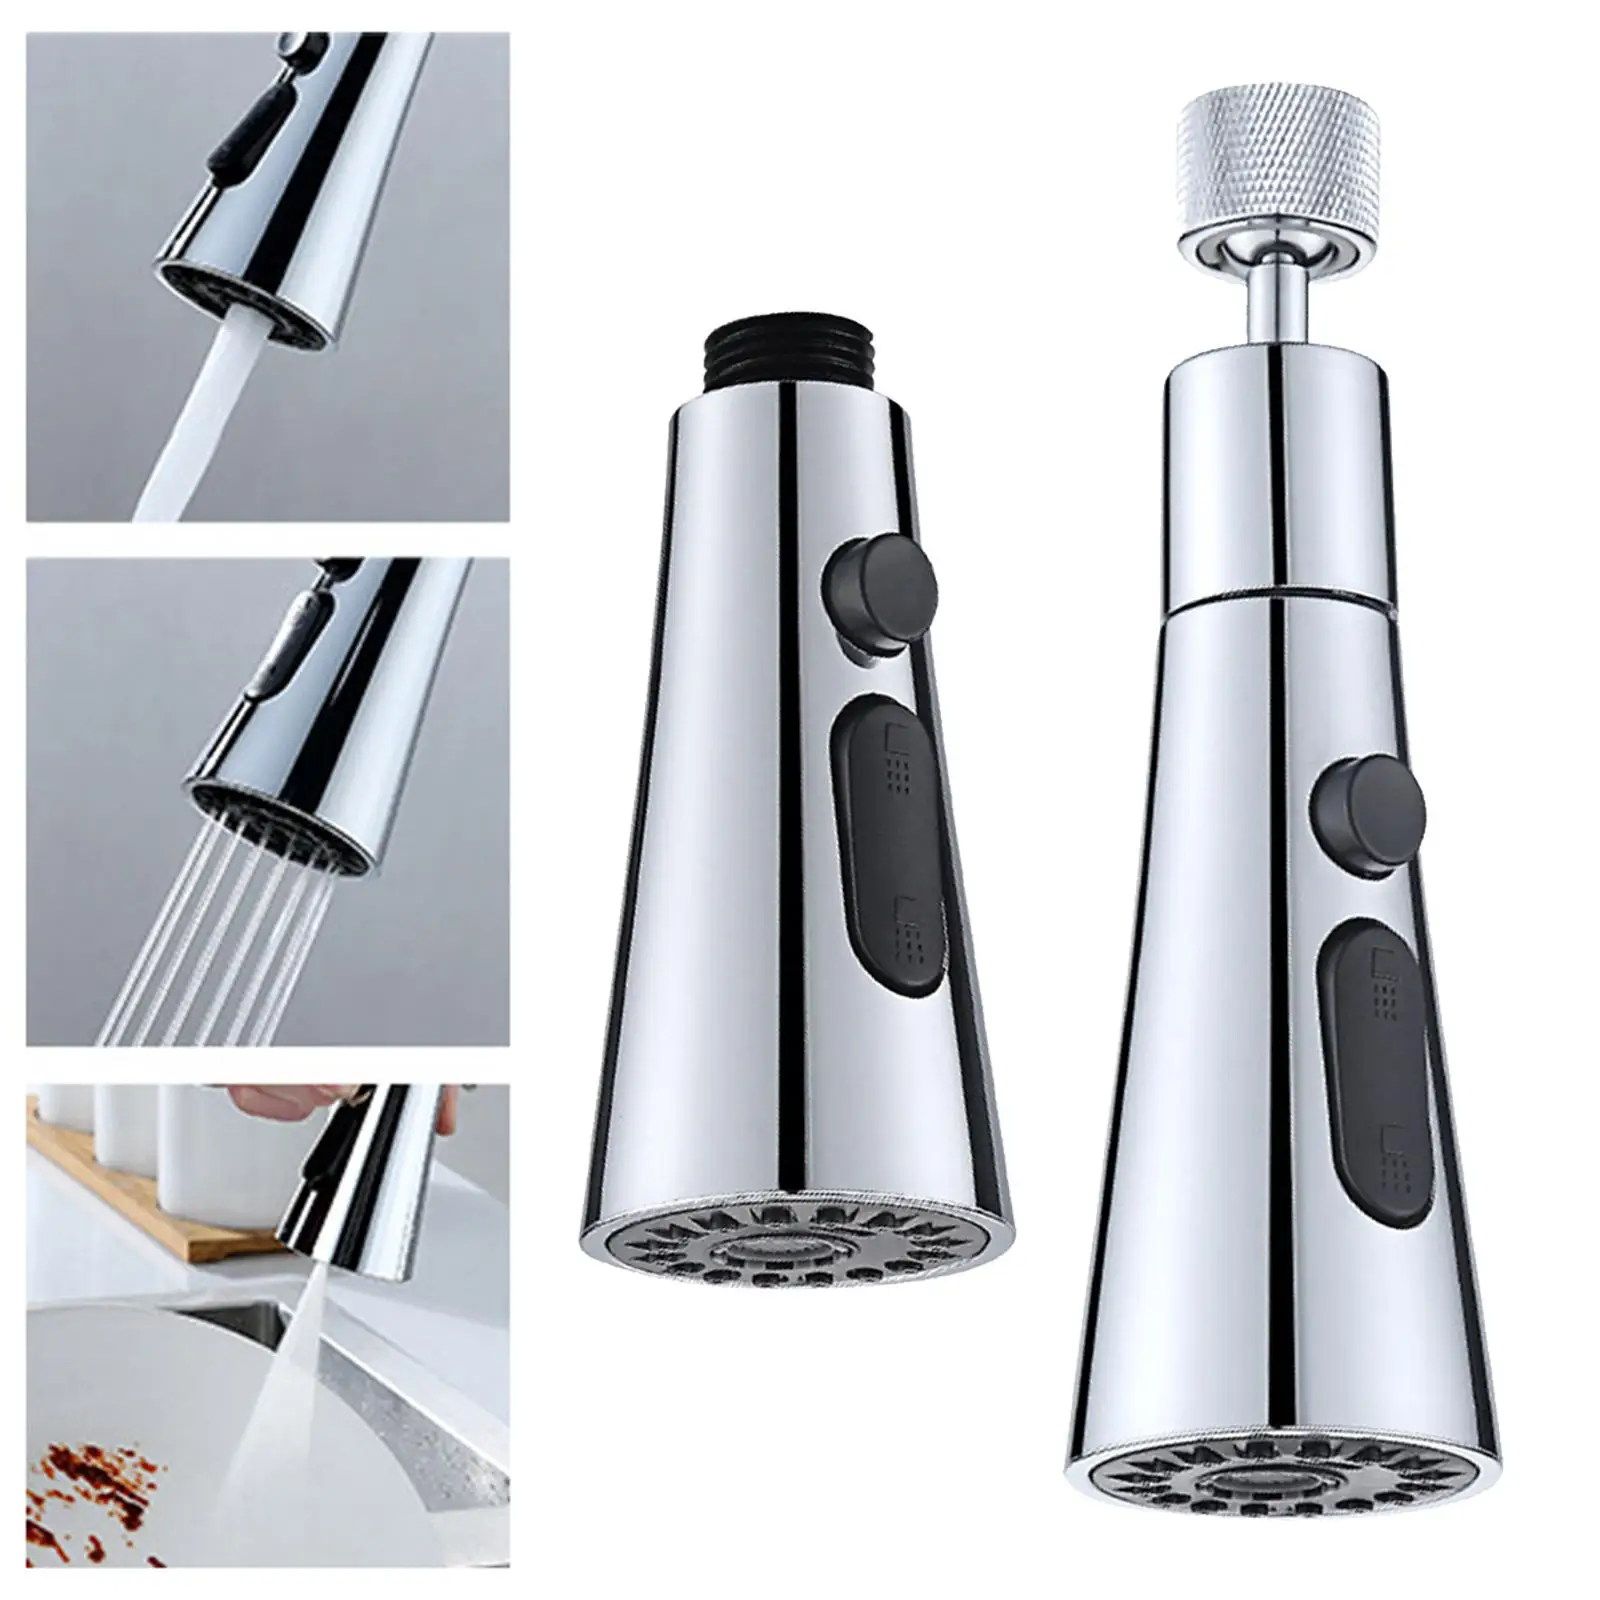 360 Degree Rotatable Faucet Sprayer Faucet Aerator Kitchen Sink Accessories Kitchen Sink Faucet for Home Bathroom Kitchen